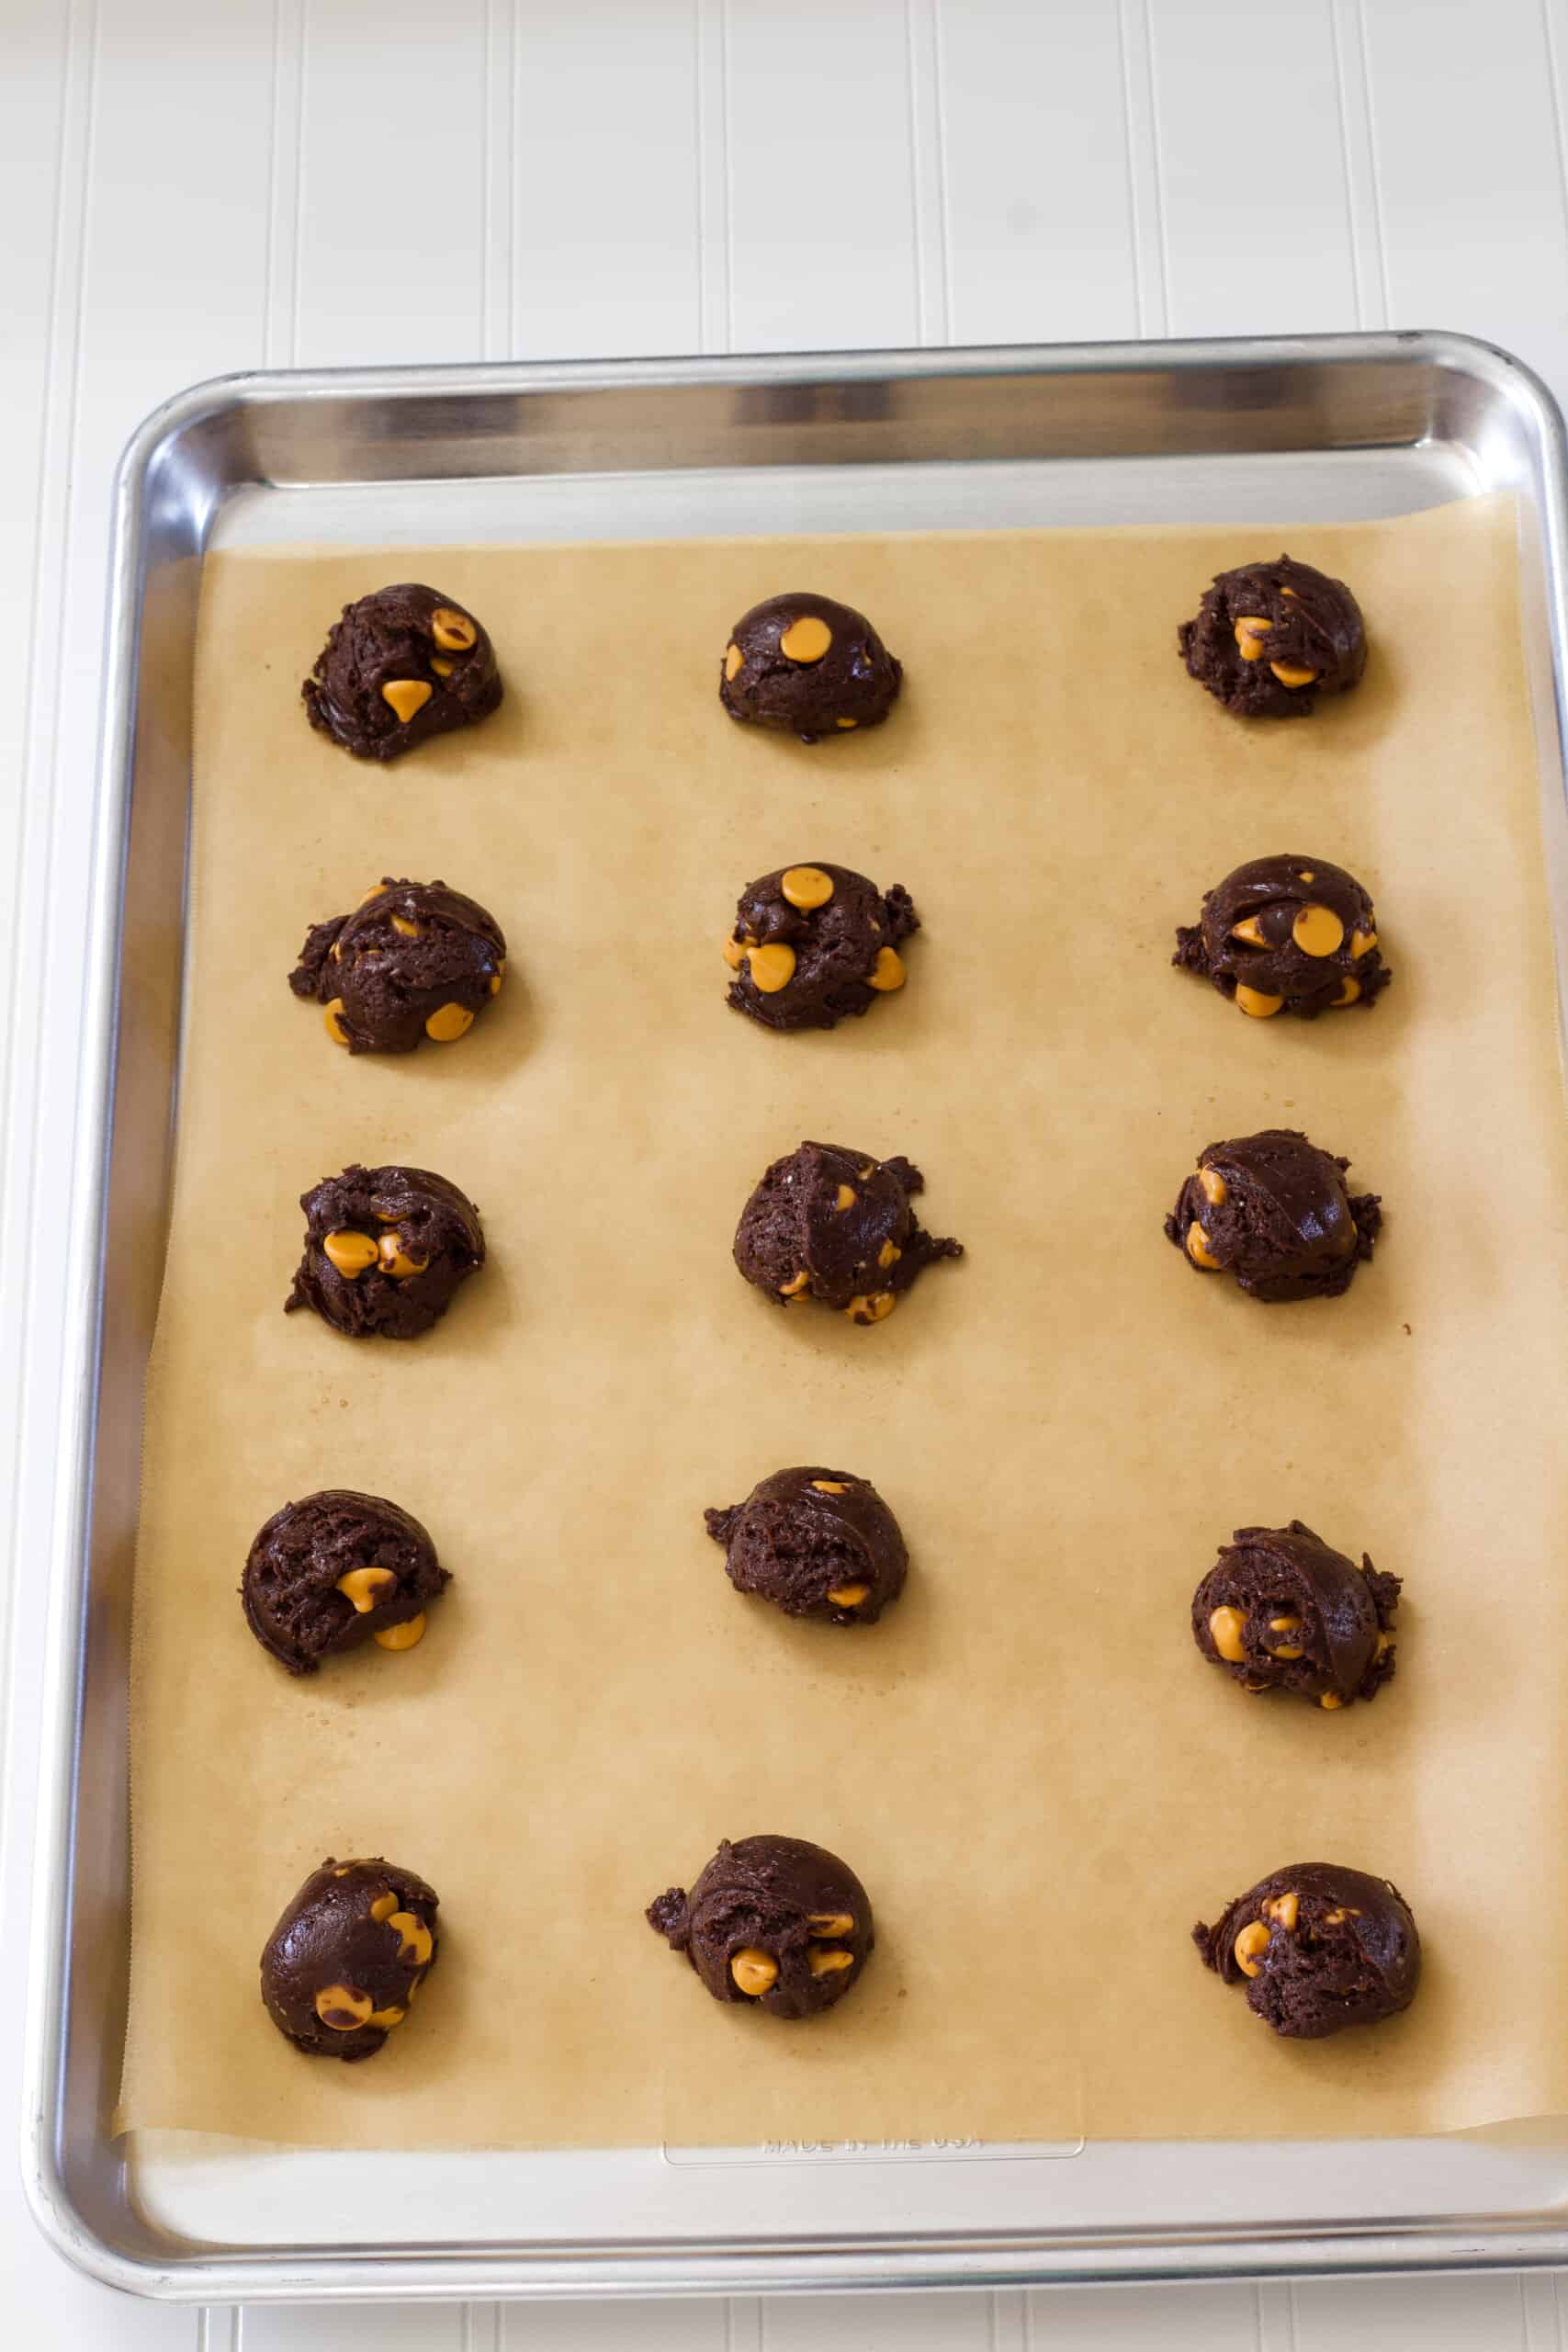 One dozen balls of raw cookie dough on a parchment paper lined baking pan.